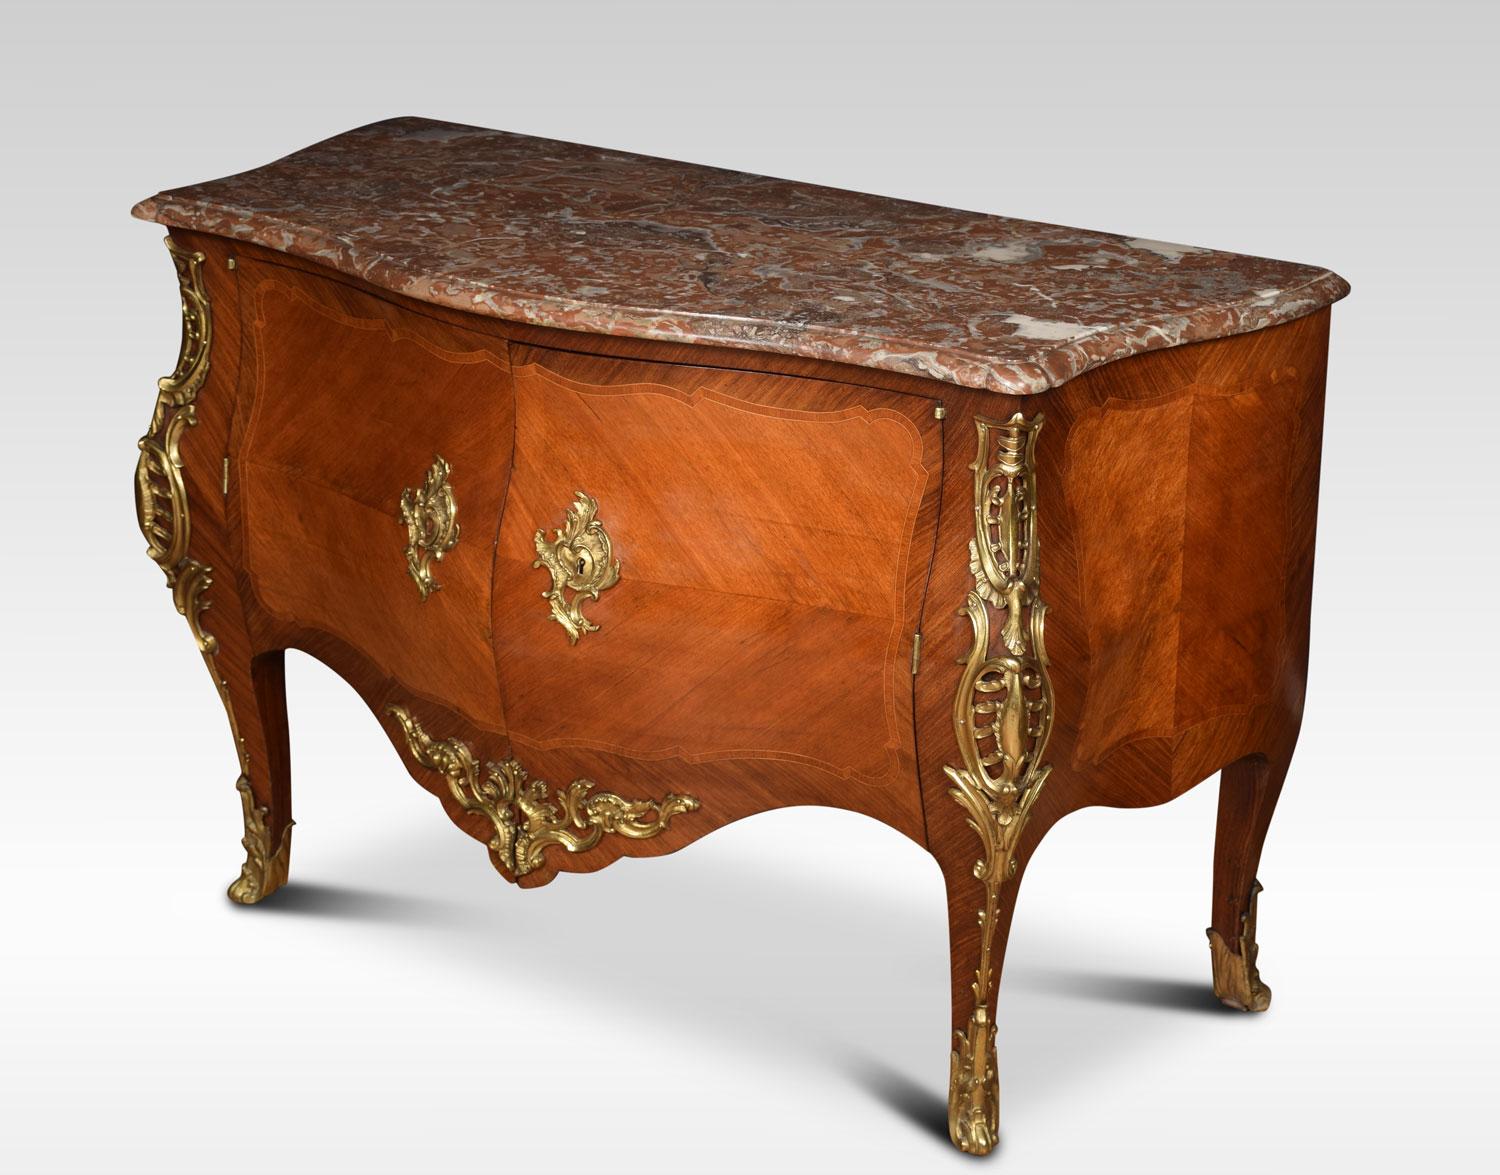 Louis XV Late 18th Century French Gilt Bronze-Mounted Commode For Sale